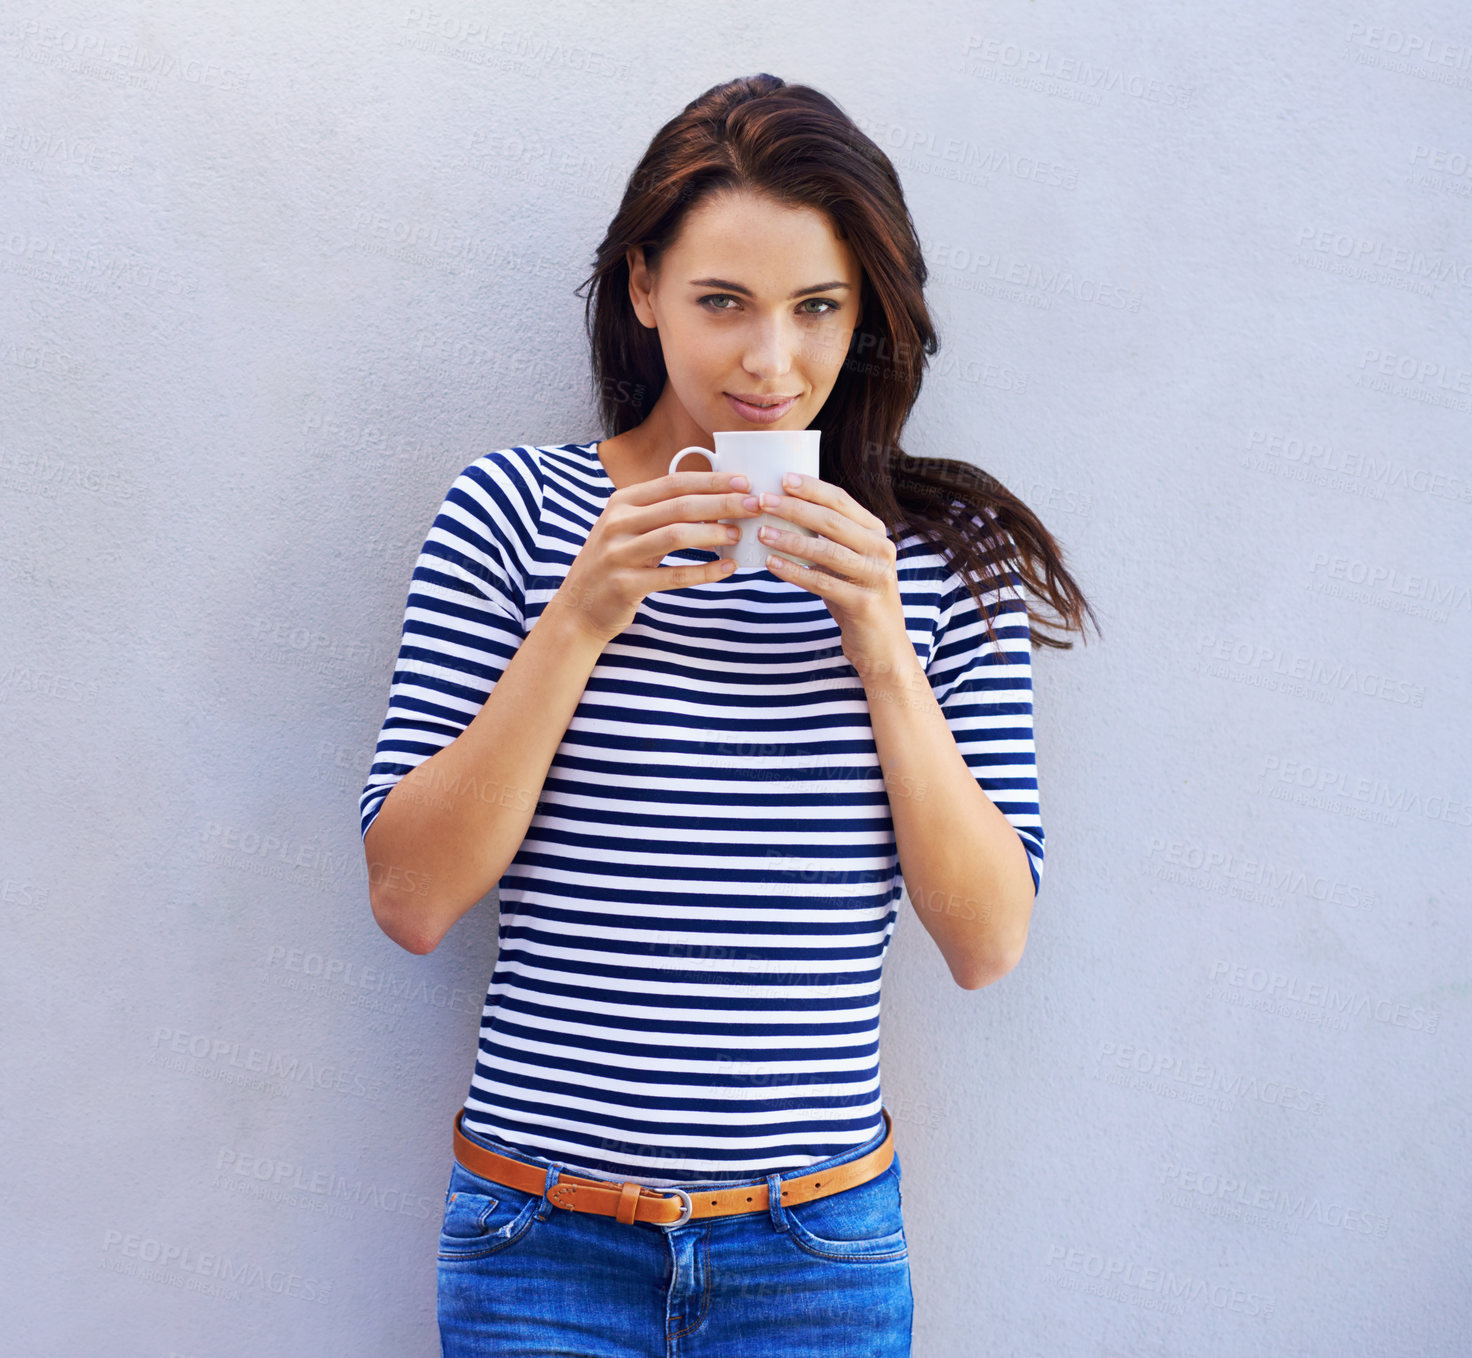 Buy stock photo Portrait of a an attractive woman holding a coffee cup against a gray background